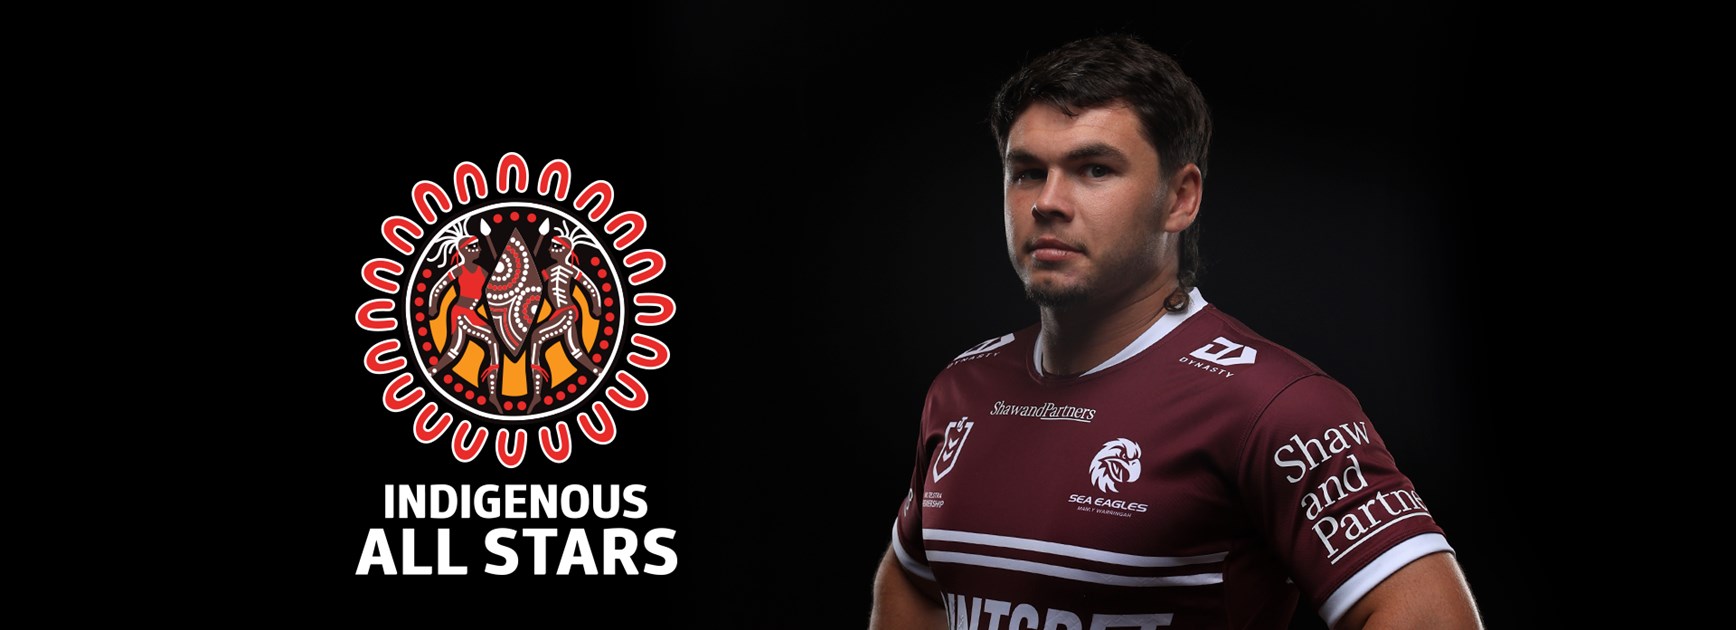 Zac Fulton added to Indigenous Men’s All Stars team